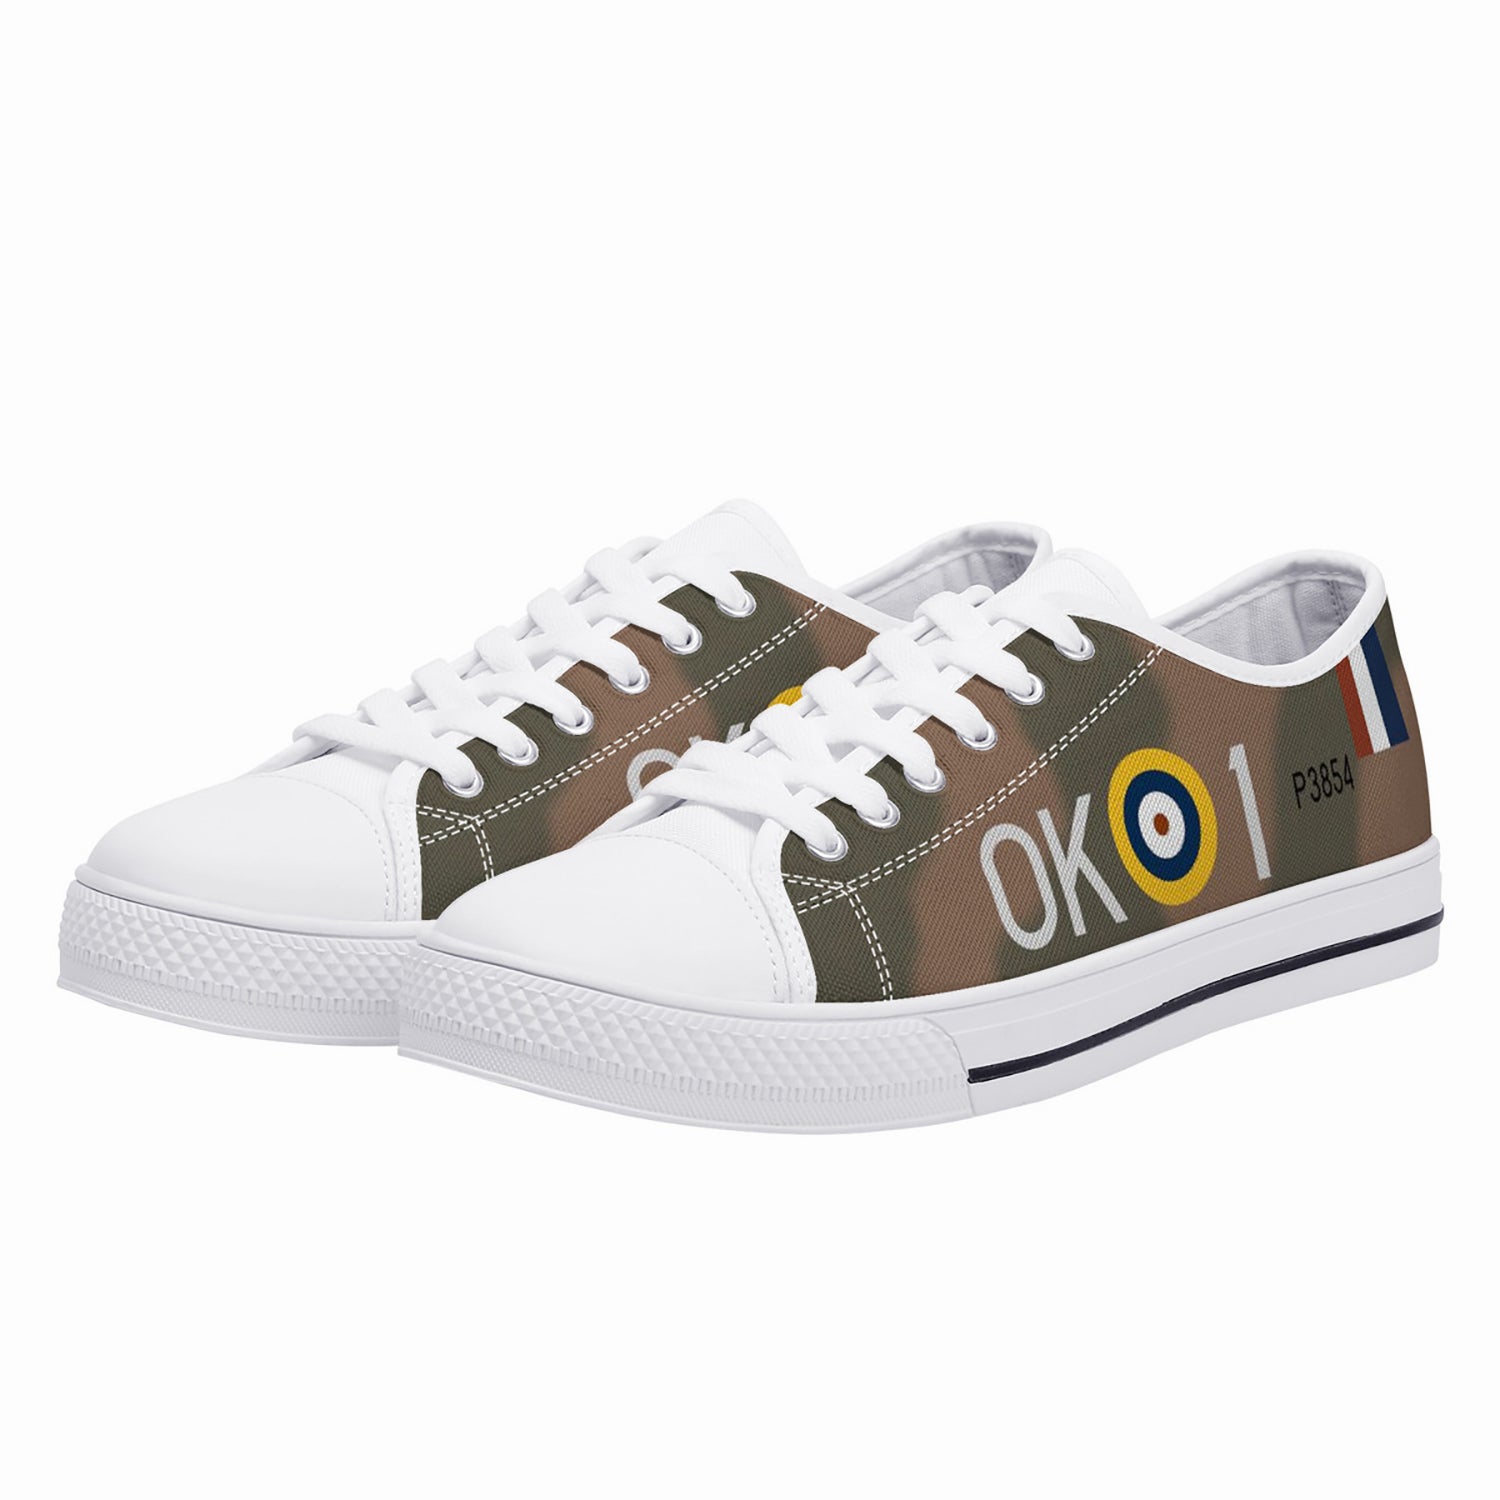 Hurricane "OK-1" (P3854) of Keith Park Low Top Canvas Shoes - I Love a Hangar